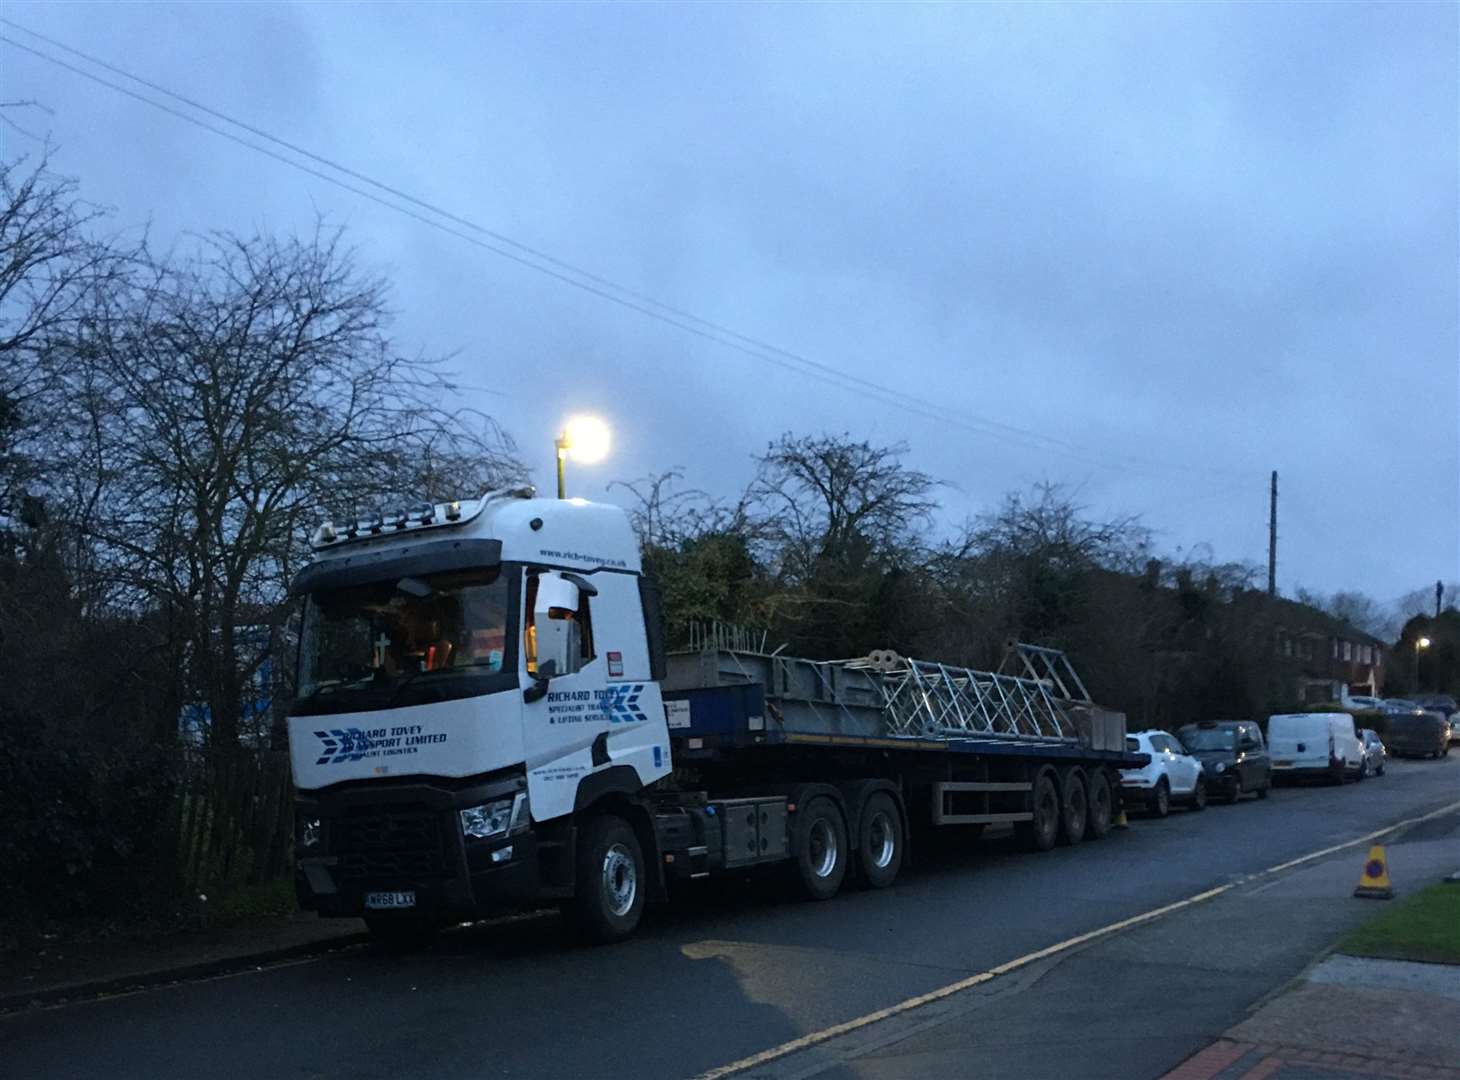 Residents parked up to block contractors vehicles when they arrived to build a phone mast off Bowmans Road